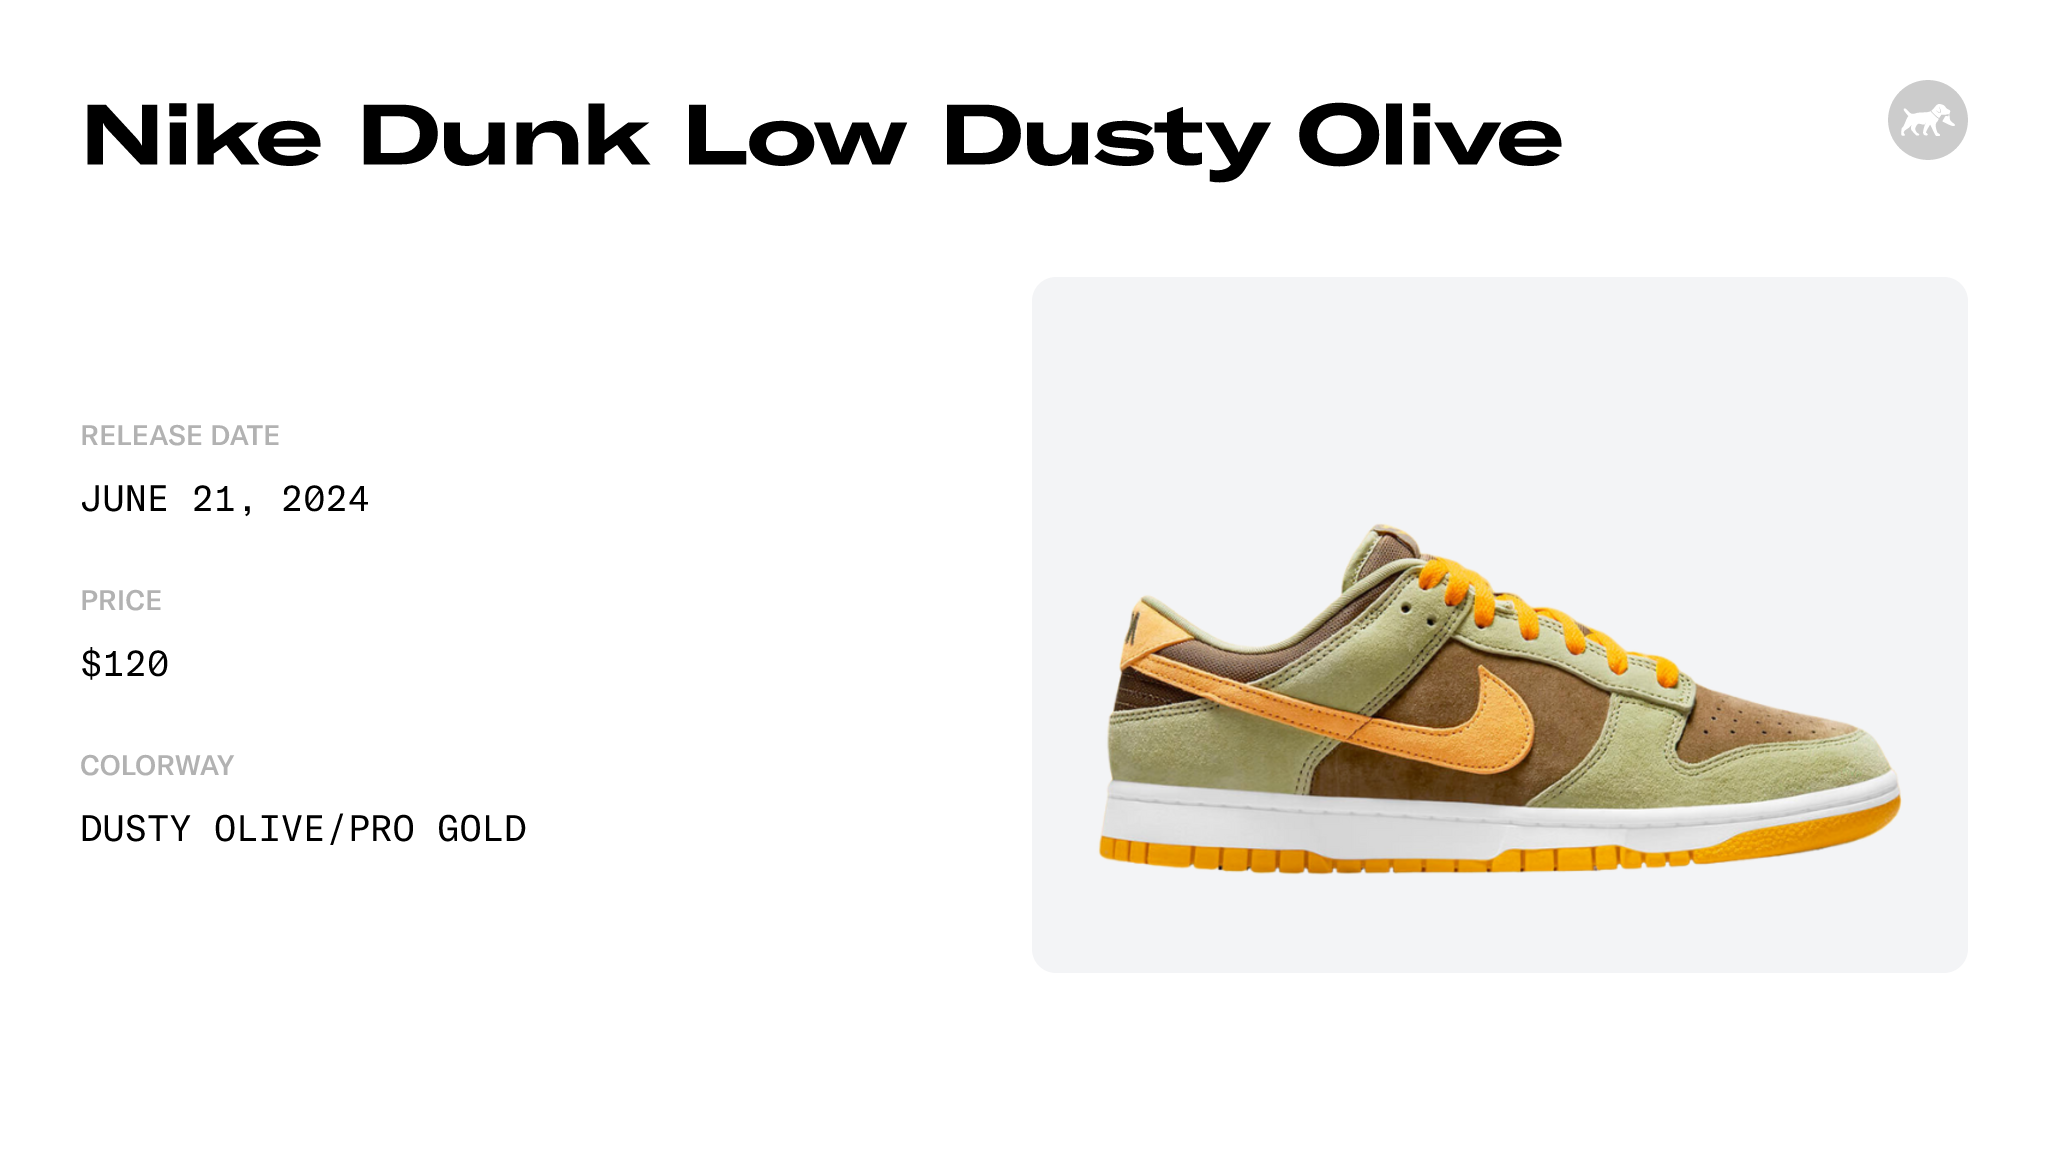 Dusty DH5360-300 and Olive Low - Raffles Date Dunk Release Nike